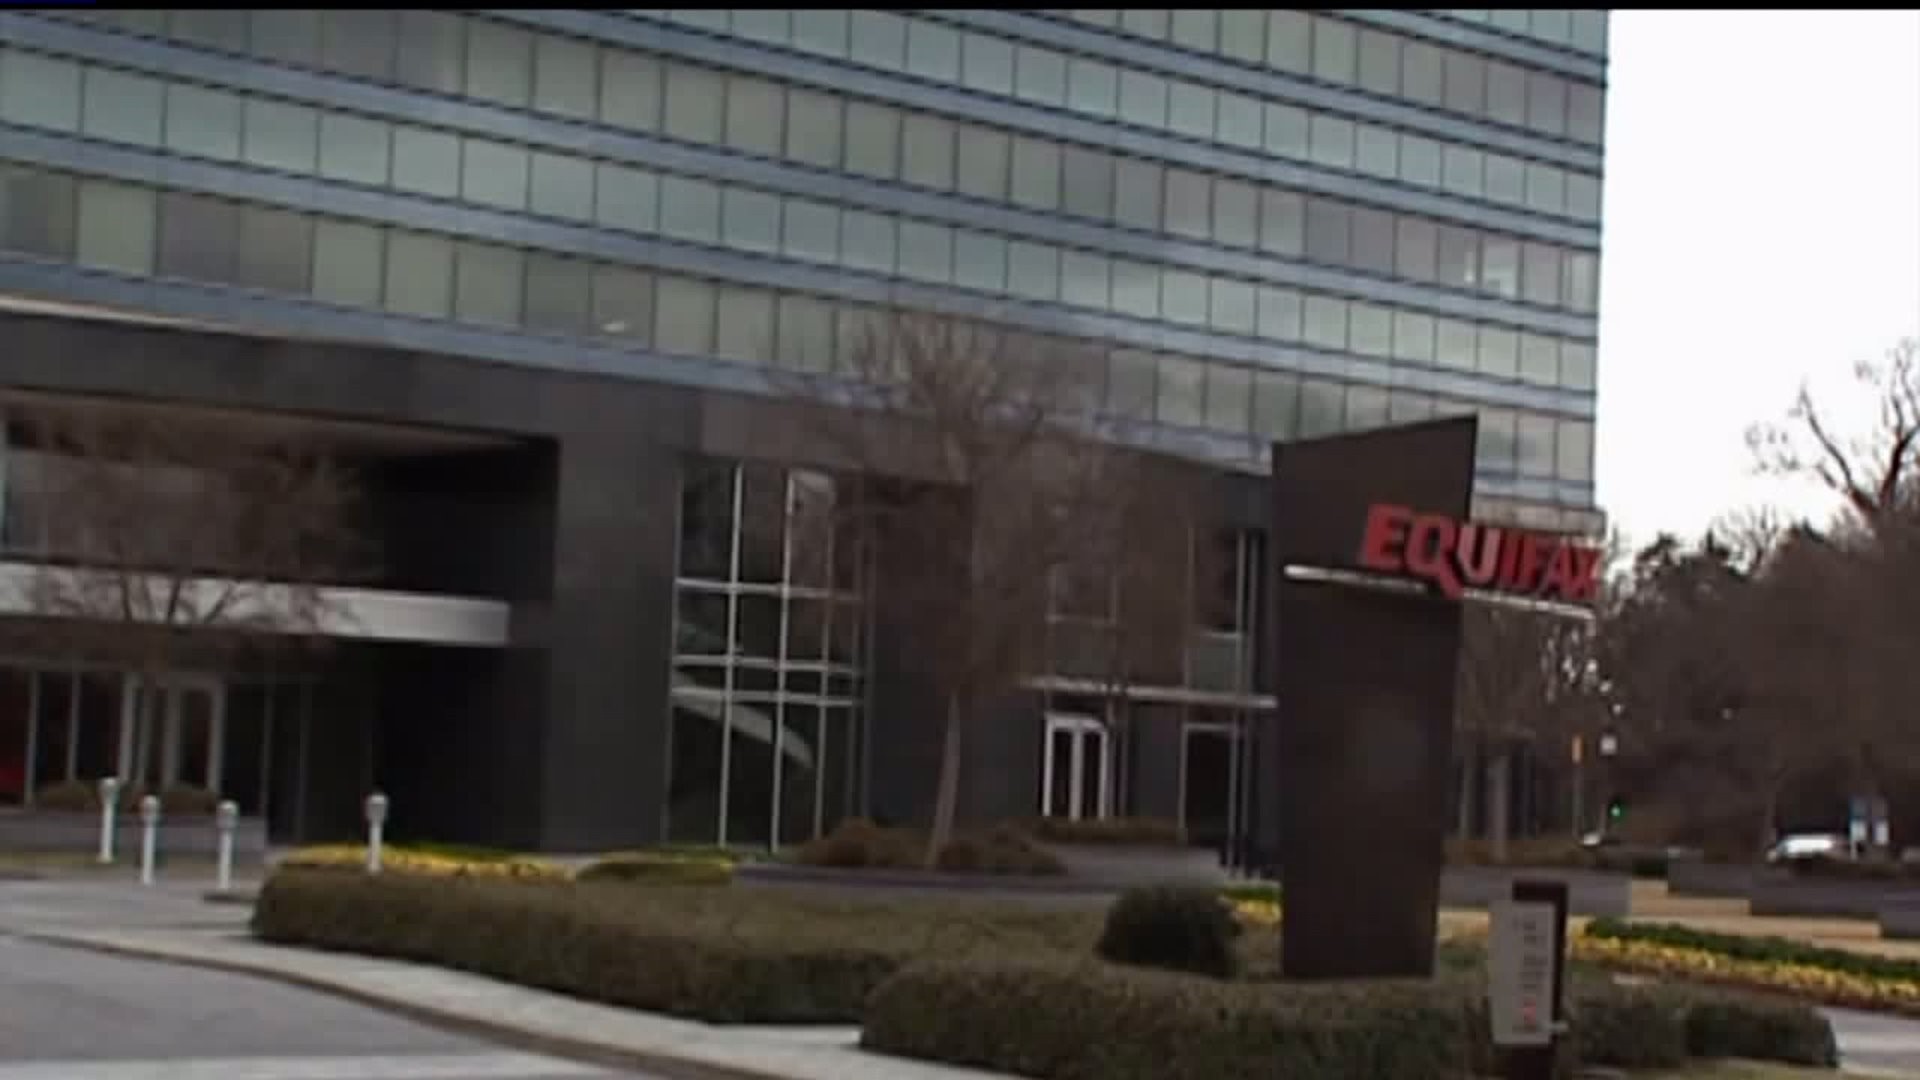 Equifax CEO resigns